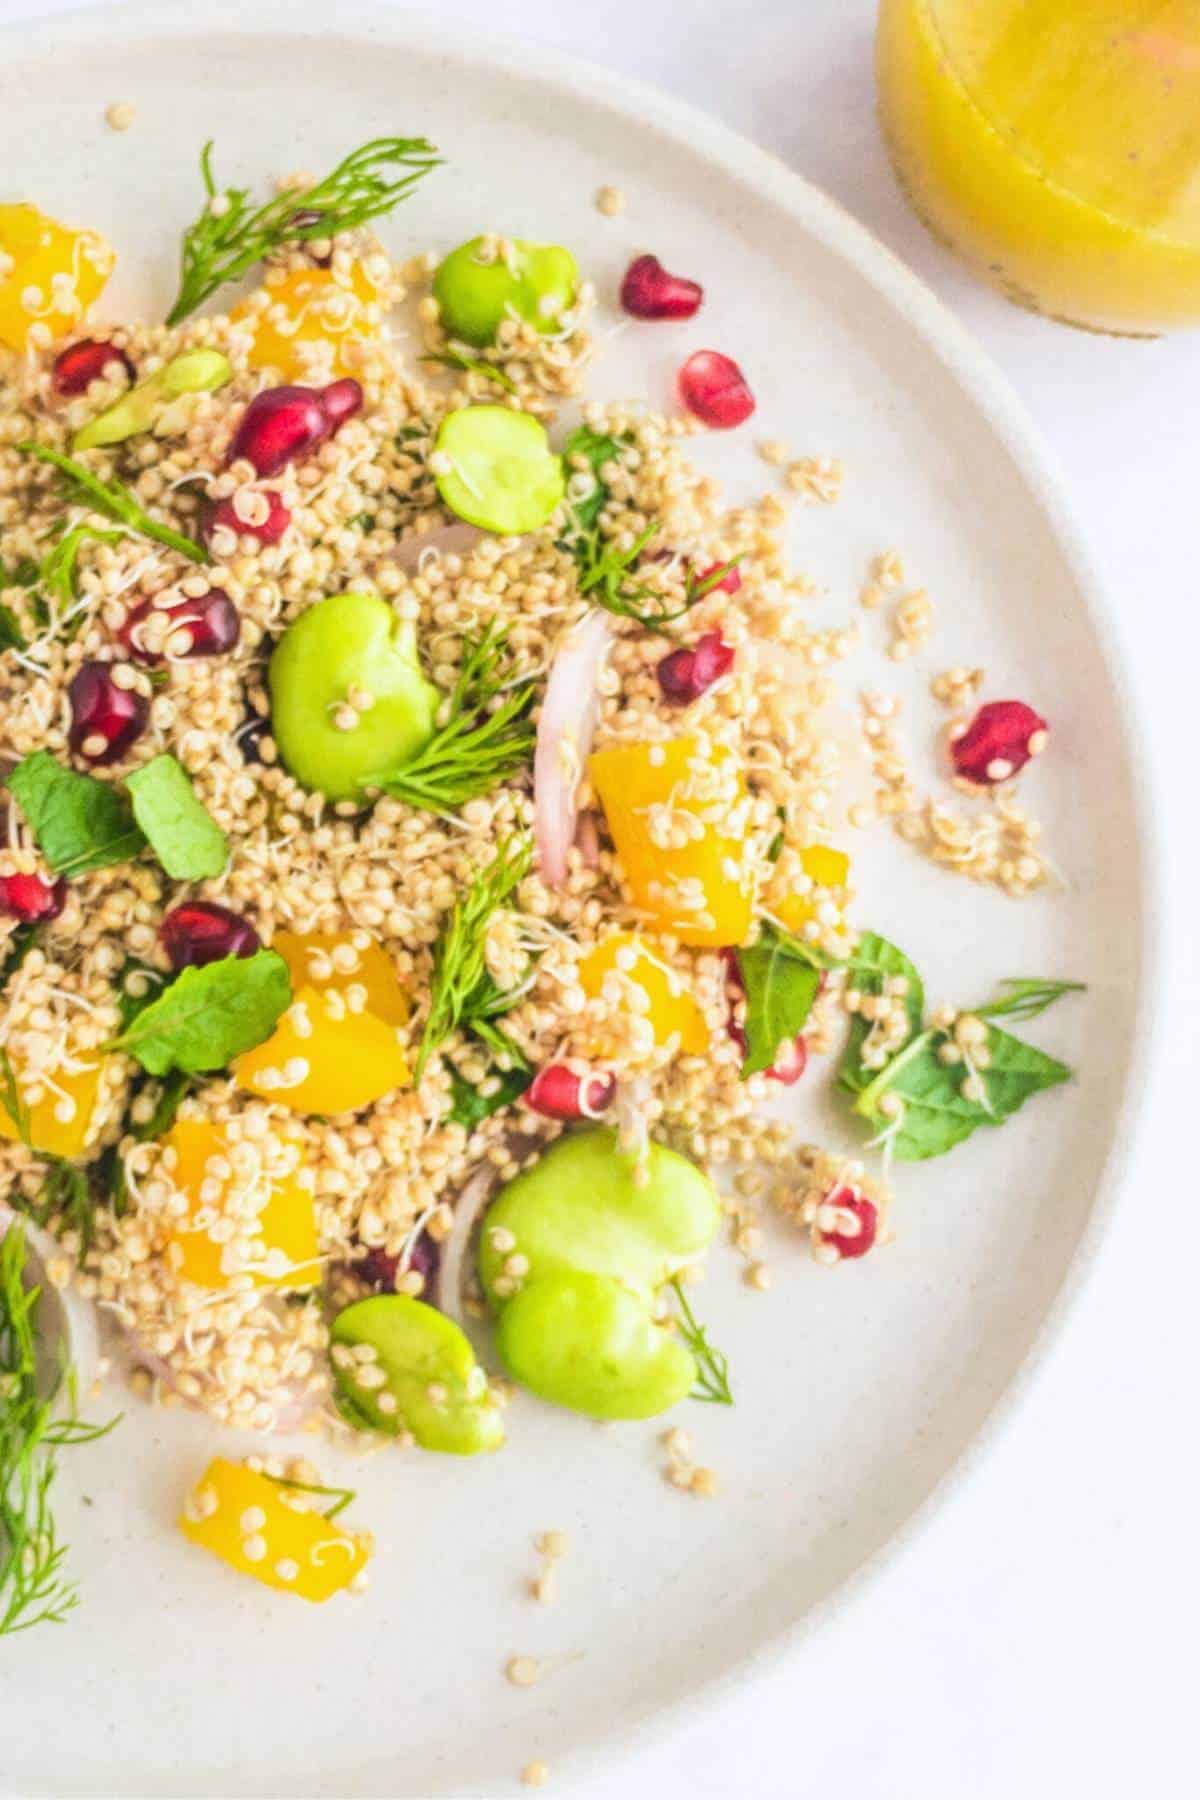 A plate of sprouted quinoa salad next to a glass with vinaigrette.